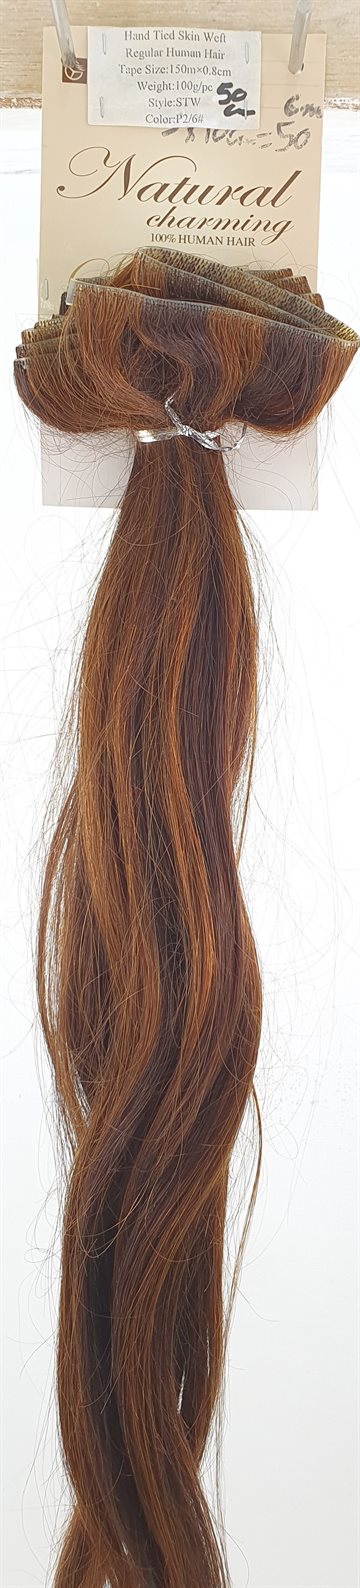  Human Hair - Skin Weft color P2/6 - (MIXED COLOR) Full extention. (UDSOLGT).